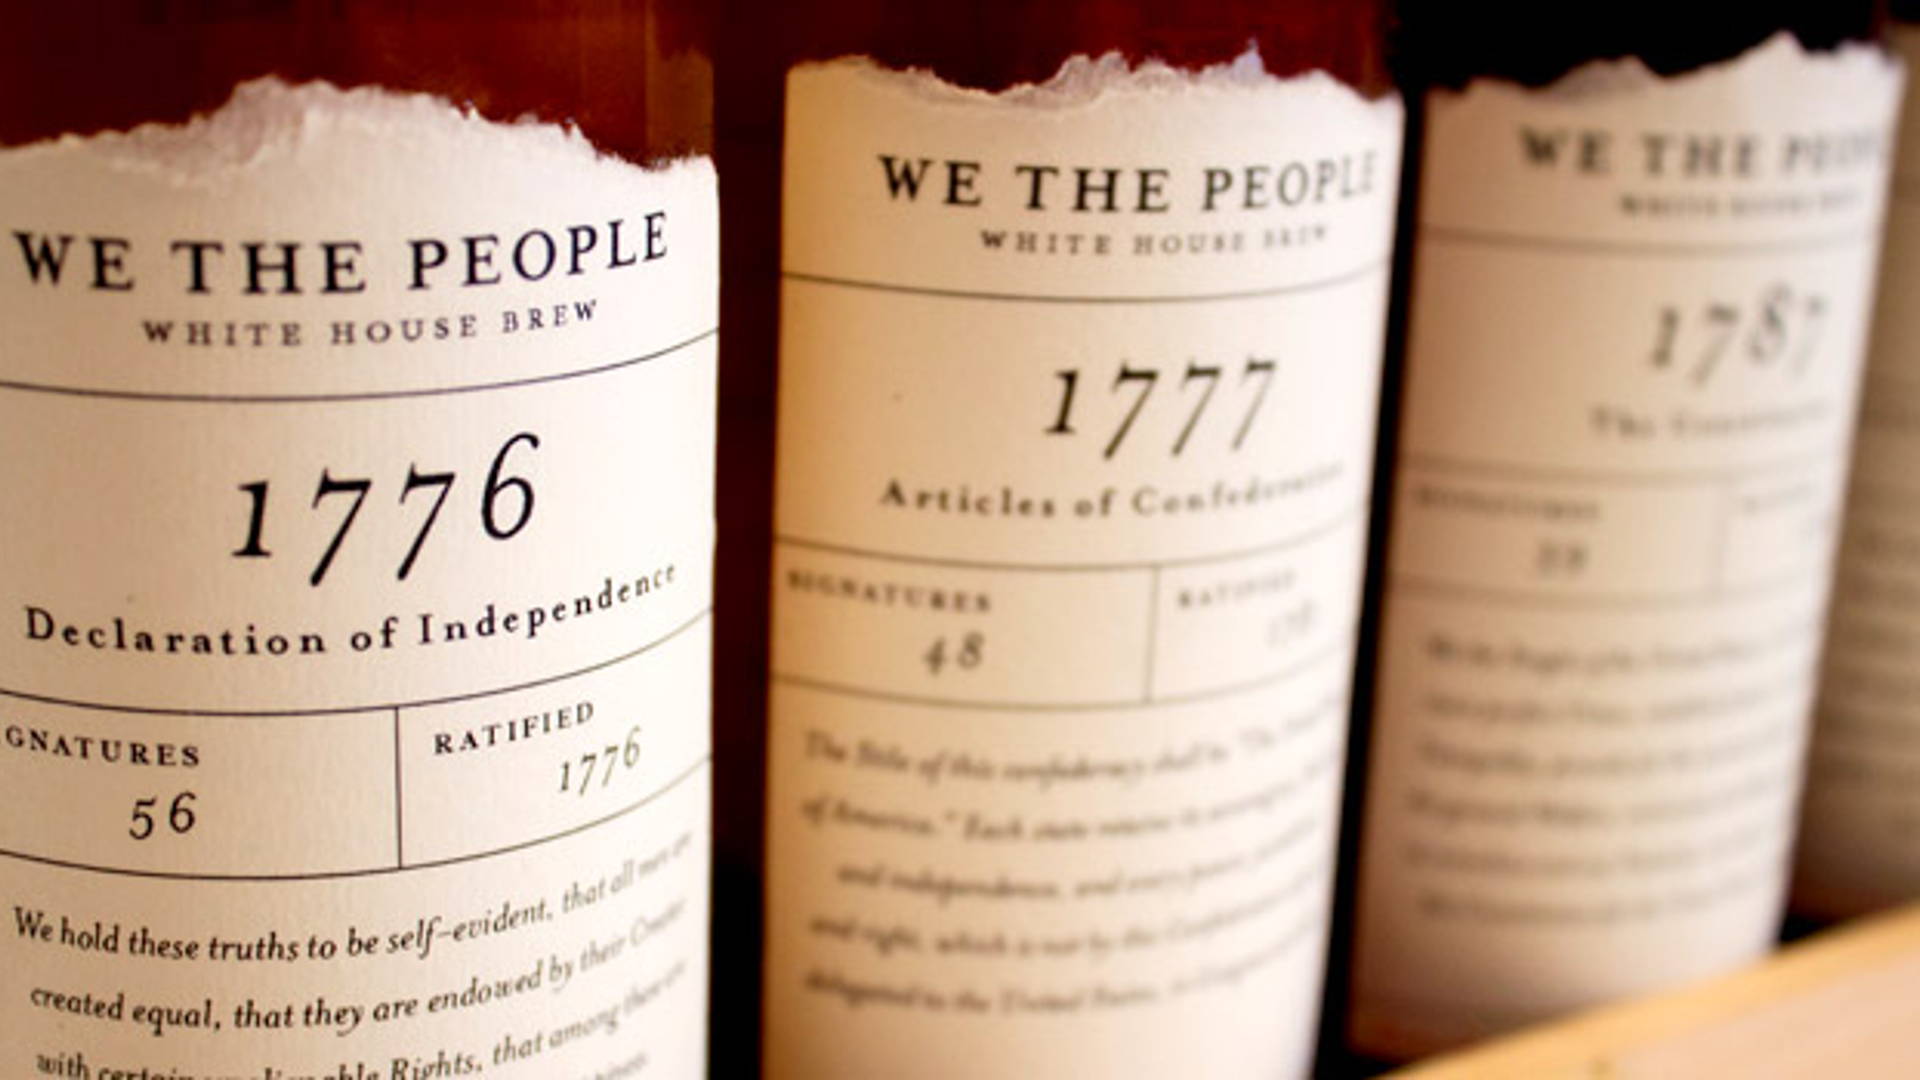 Featured image for Student Project: We The People White House Brew